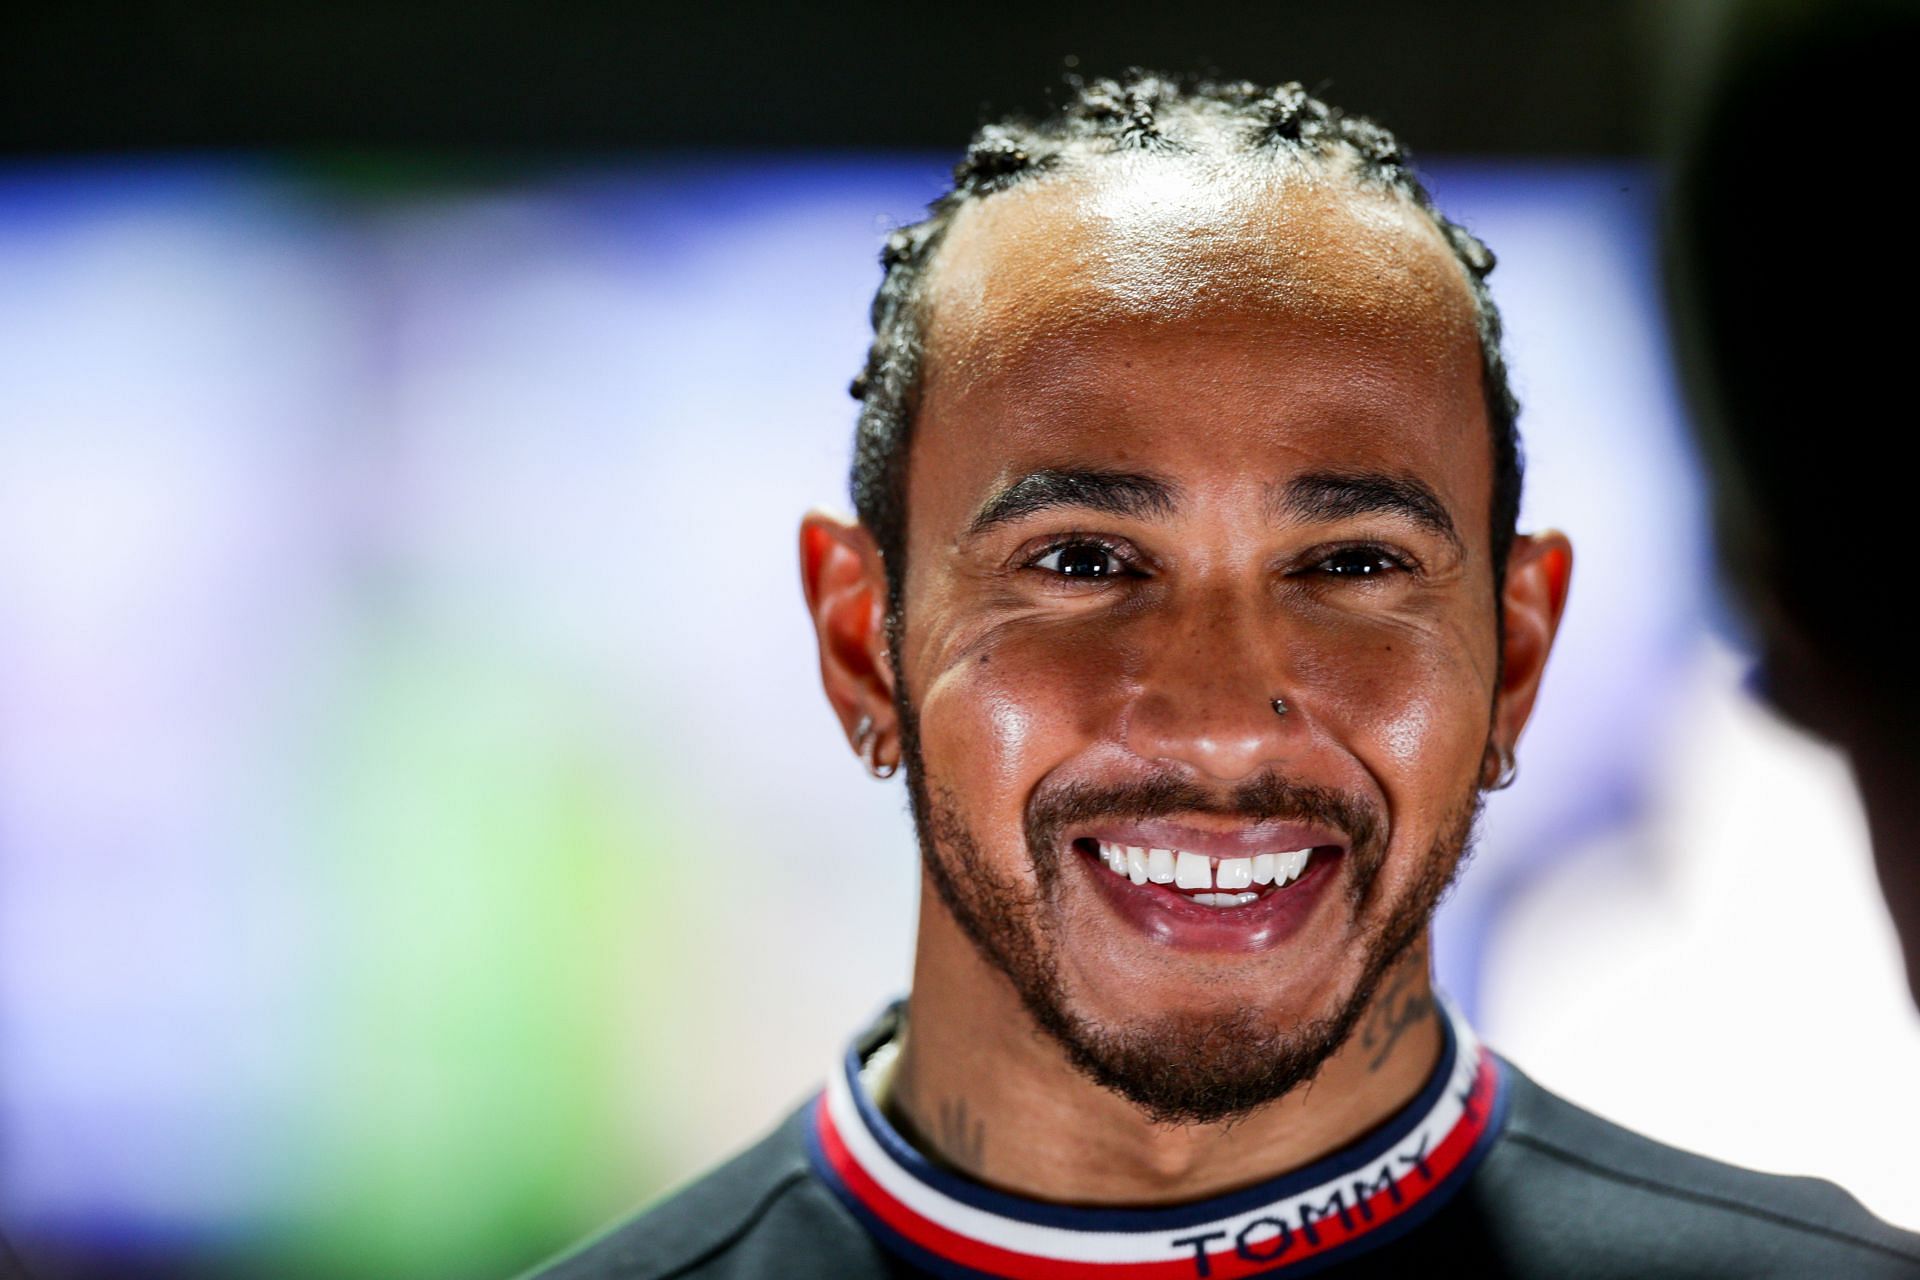 Lewis Hamilton during previews ahead of the 2021 Saudi Arabian Grand Prix. (Photo by Peter Fox/Getty Images)